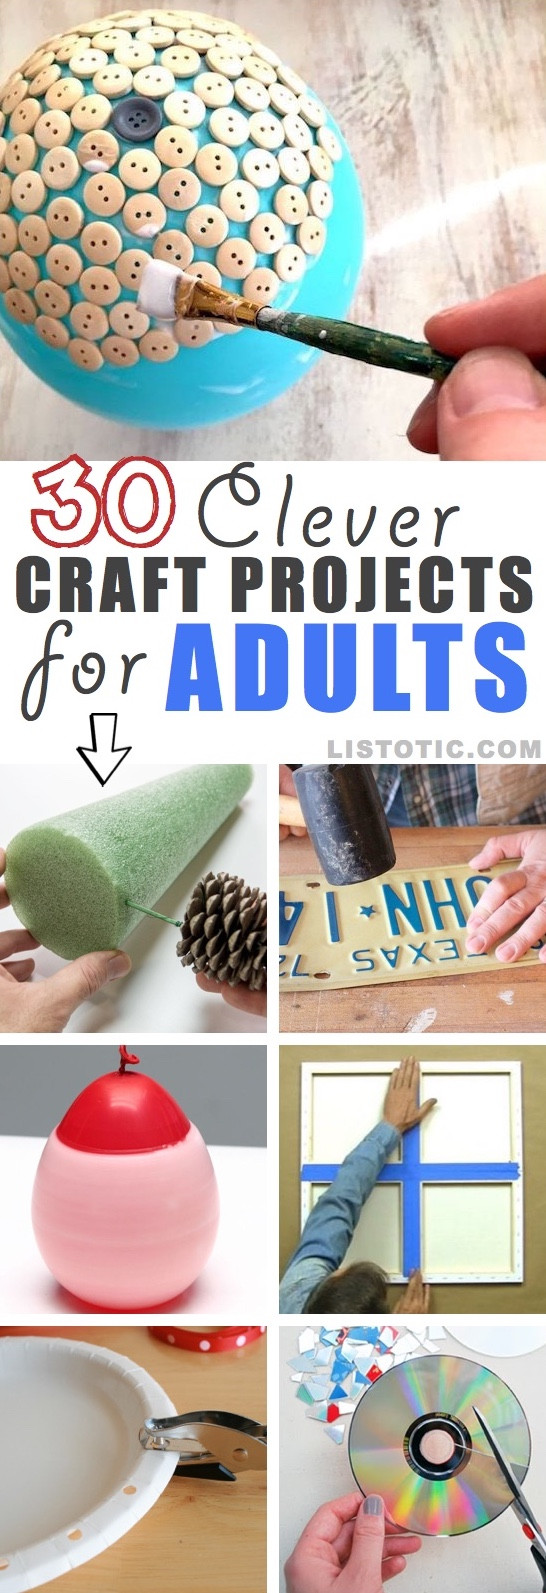 Fun Adult Gift
 Easy DIY Craft Ideas That Will Spark Your Creativity for